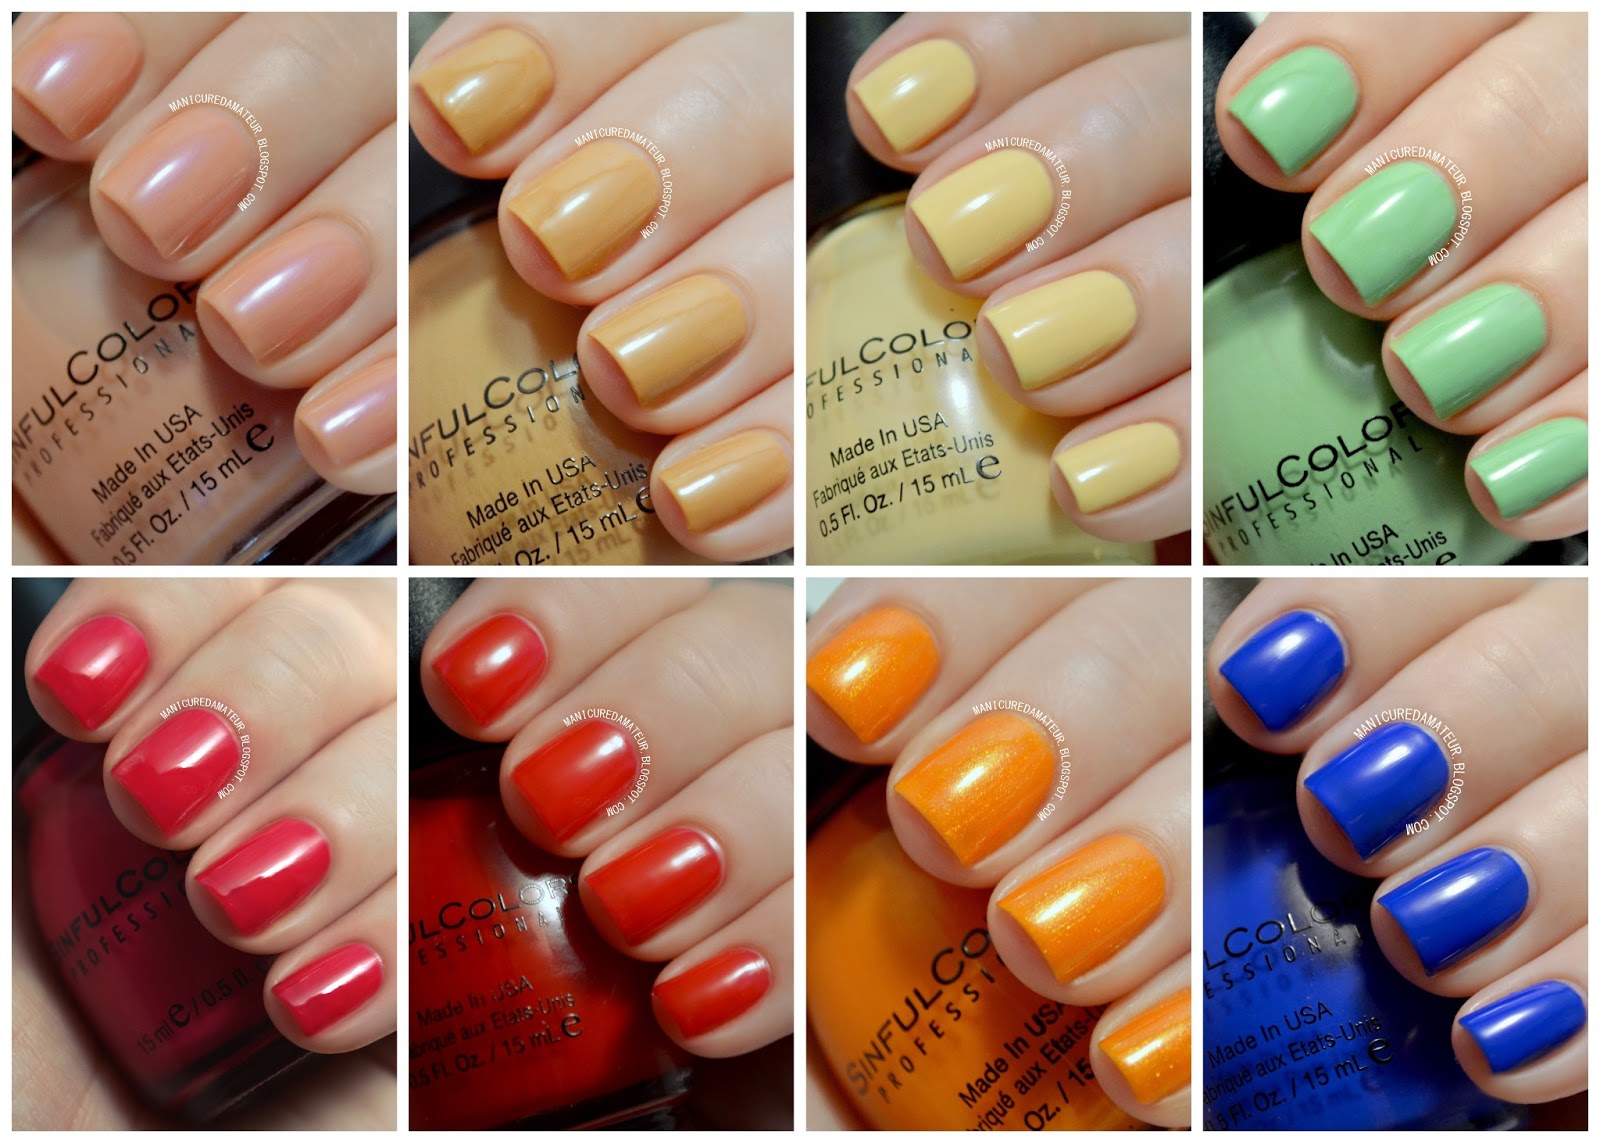 9. Sinful Colors Halloween Nail Polish Collection - wide 3